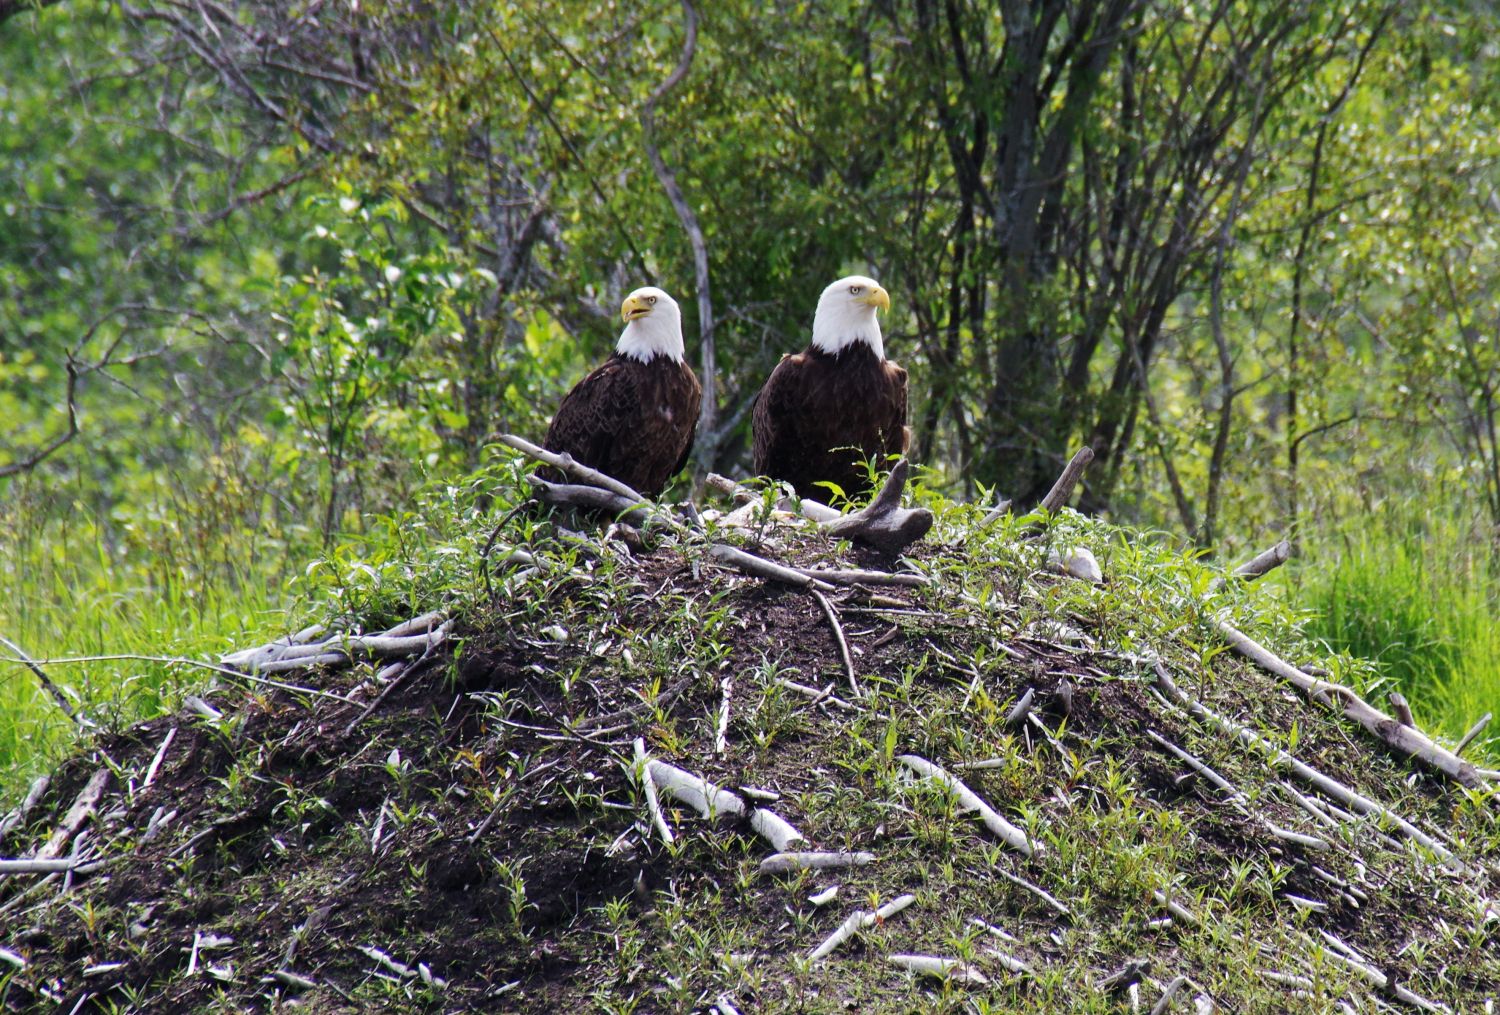 10 FACTS ABOUT BALD EAGLES YOU DIDN'T KNOW